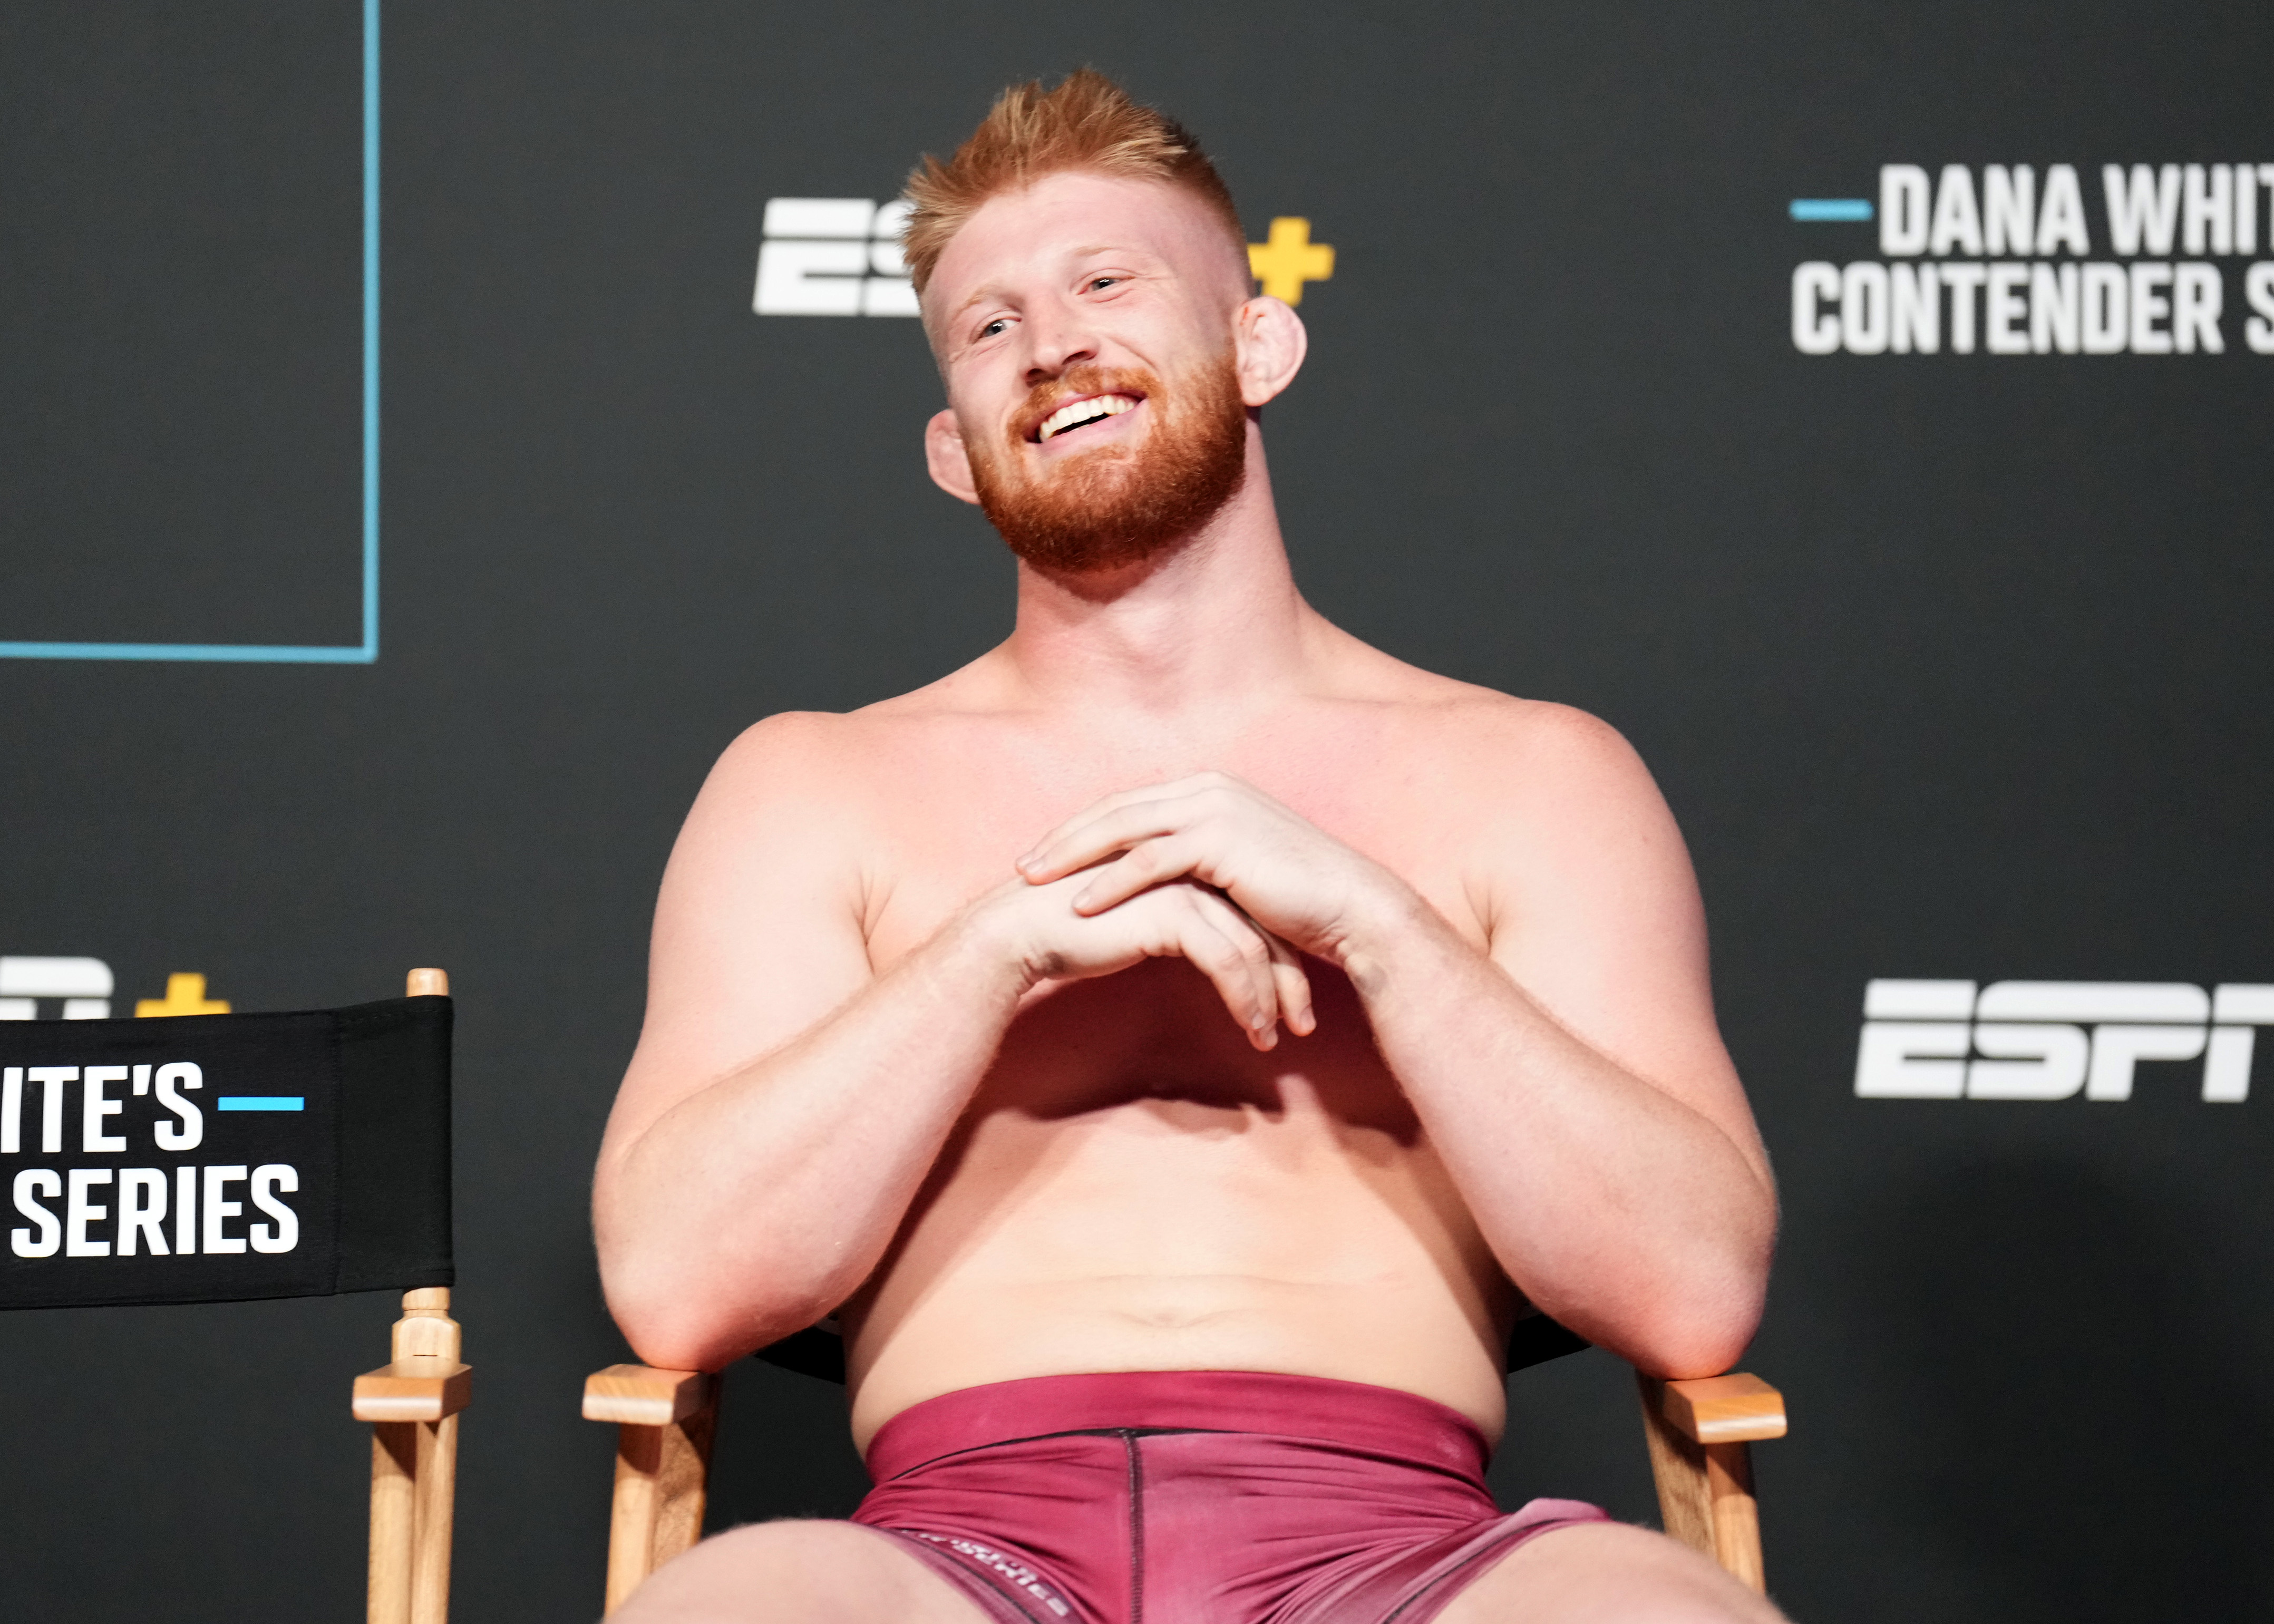 Bo Nickal gets his UFC contract after winning his week 10 Contender Series bout.